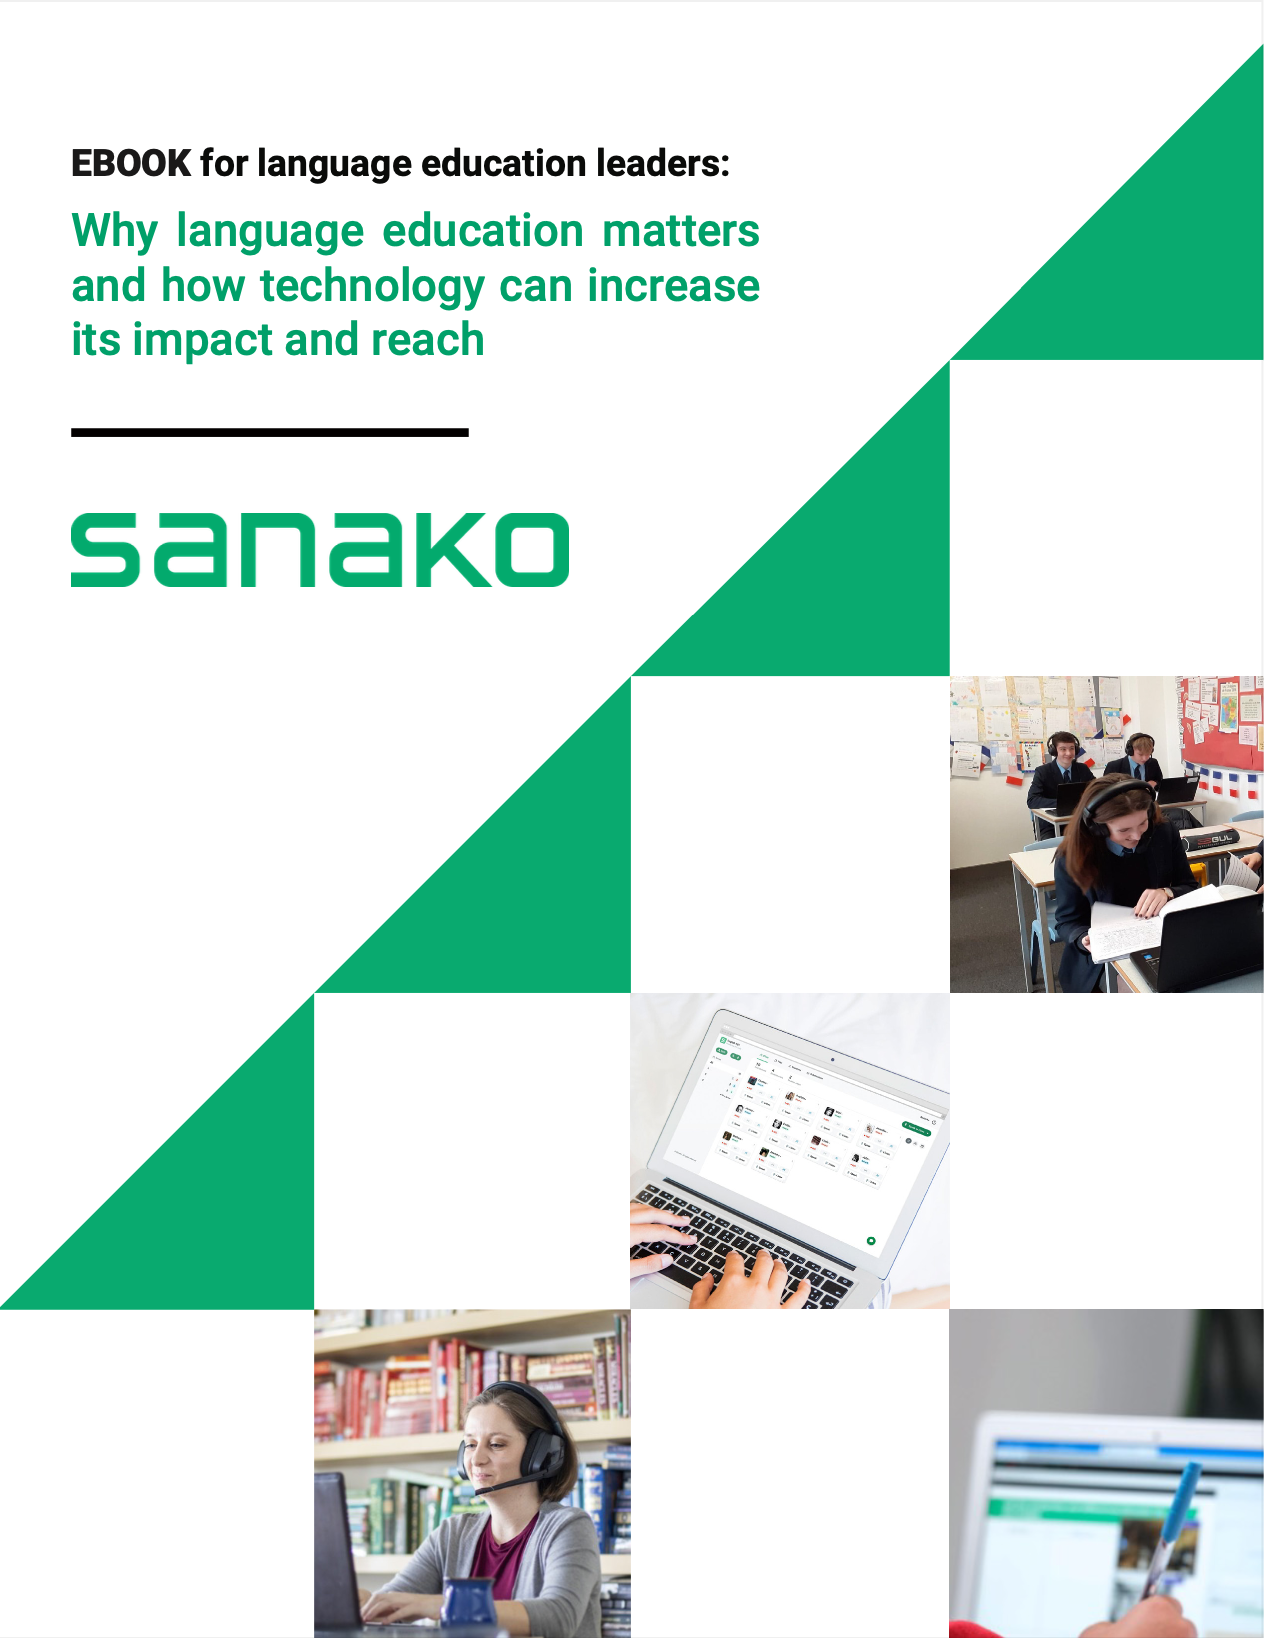 Sanako ebook for language education leaders cover page image